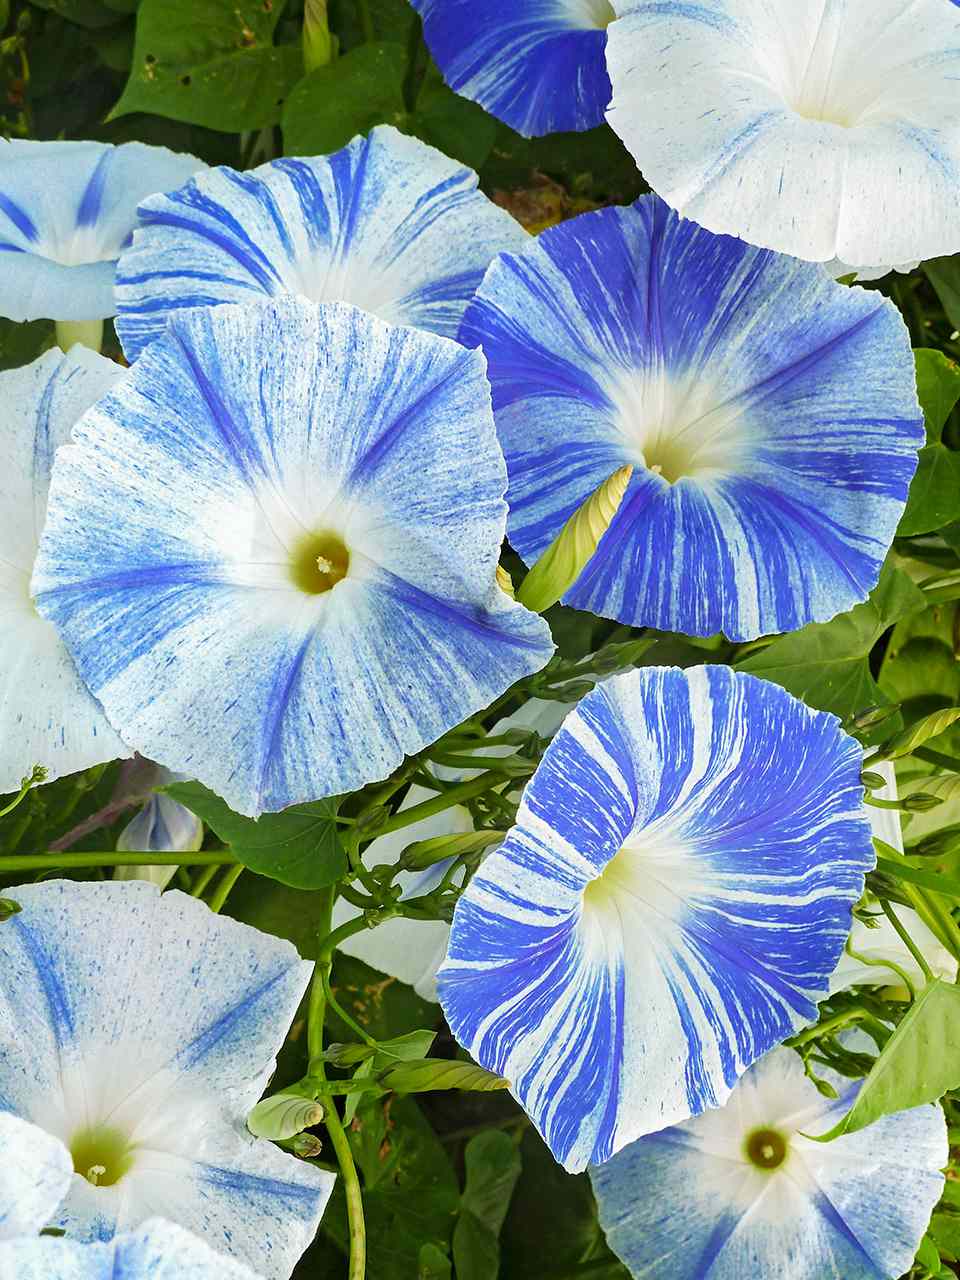 Details about   Homegrown MORNING GLORY 4 STEMS Fragrant Flower Annual Live Plant perennial seed